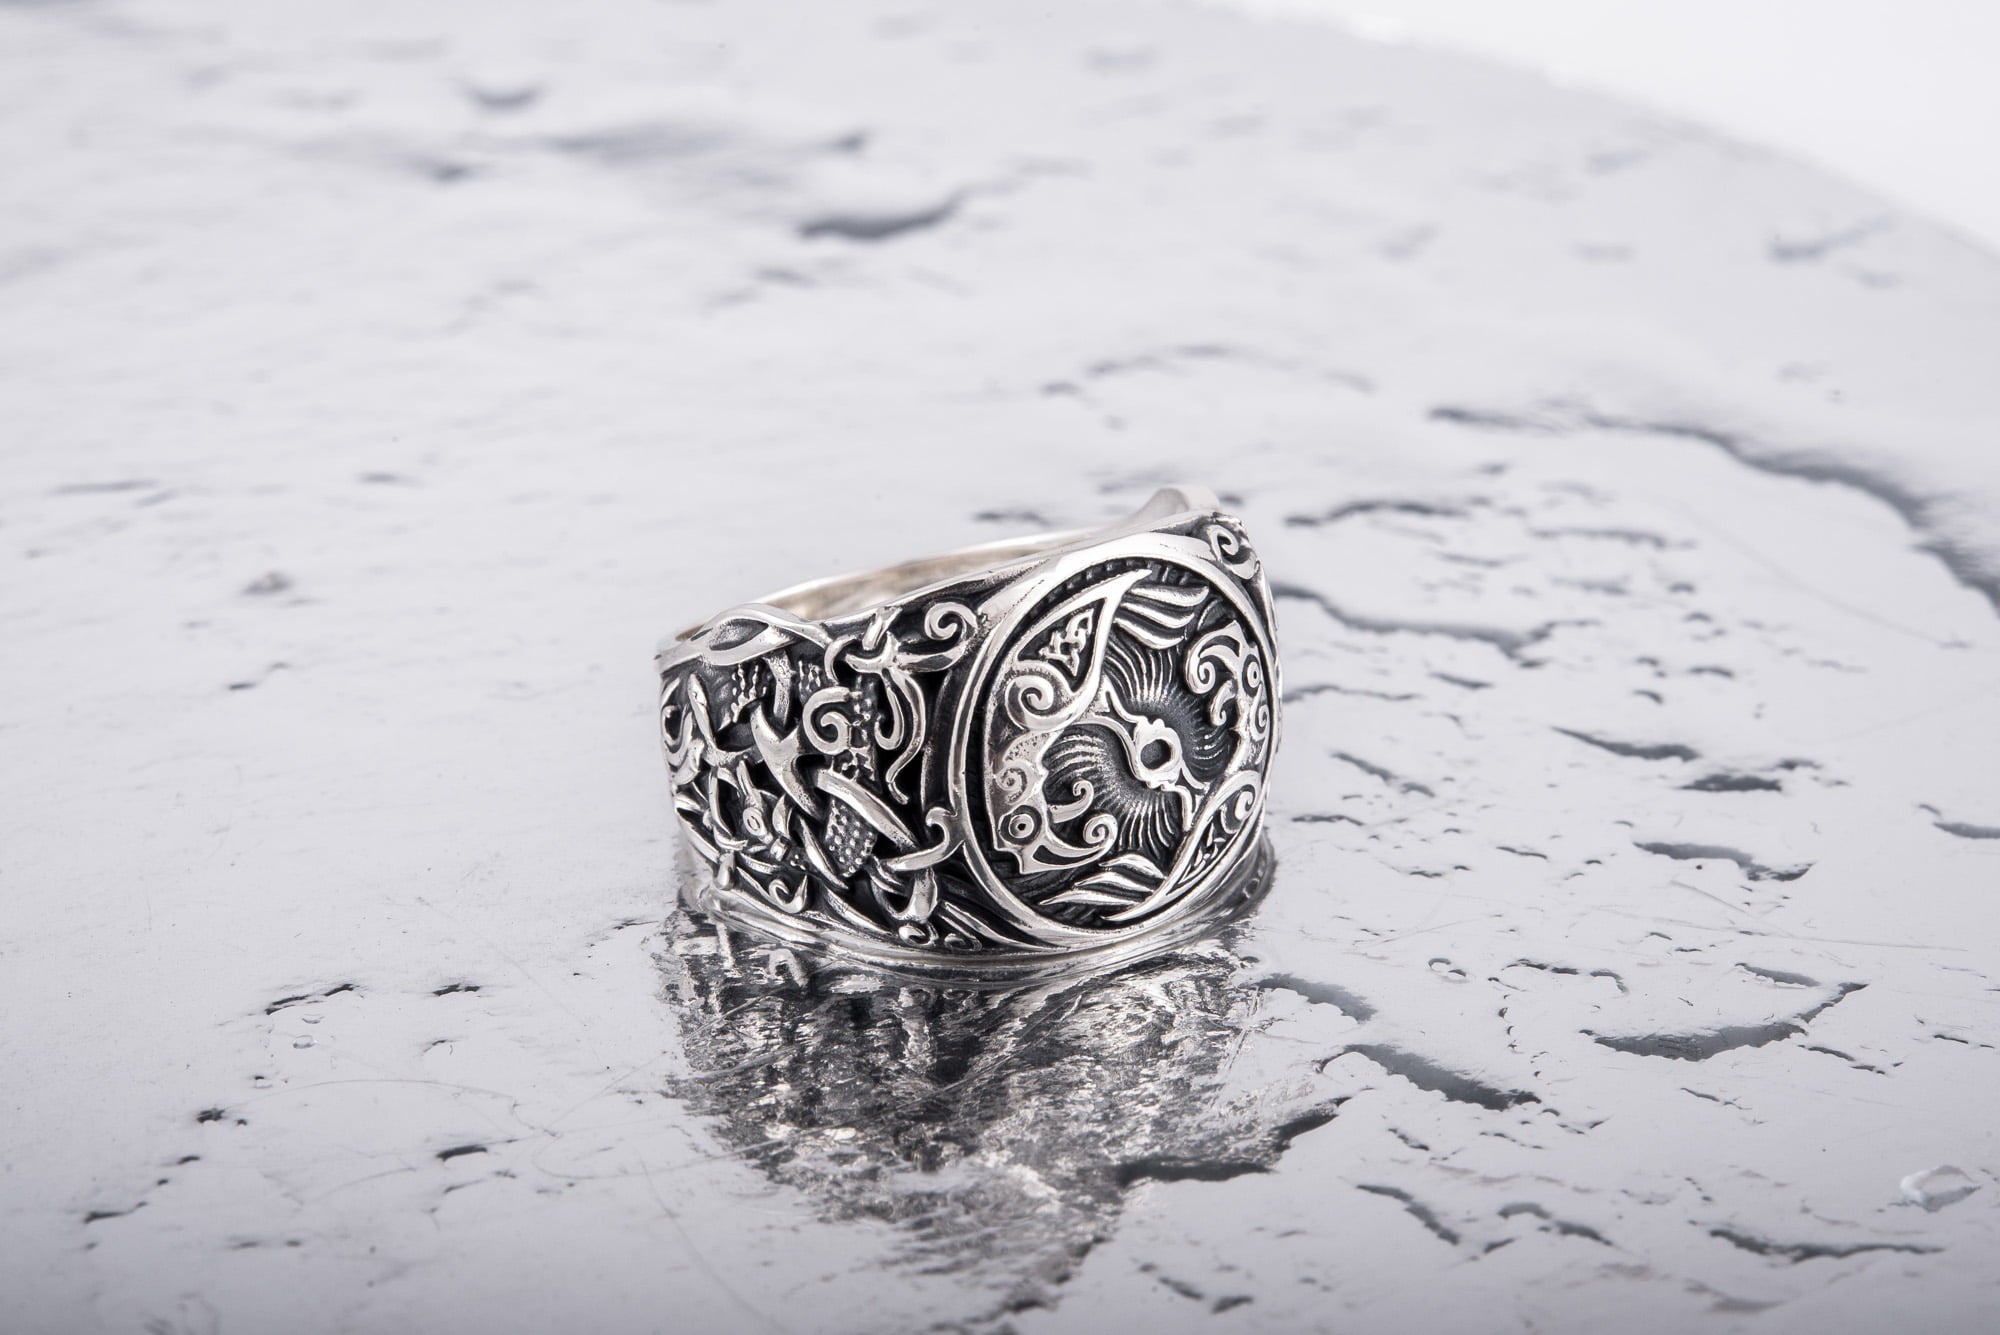 Raven Ring with Mammen Ornament Sterling Silver Viking Jewelry - vikingworkshop